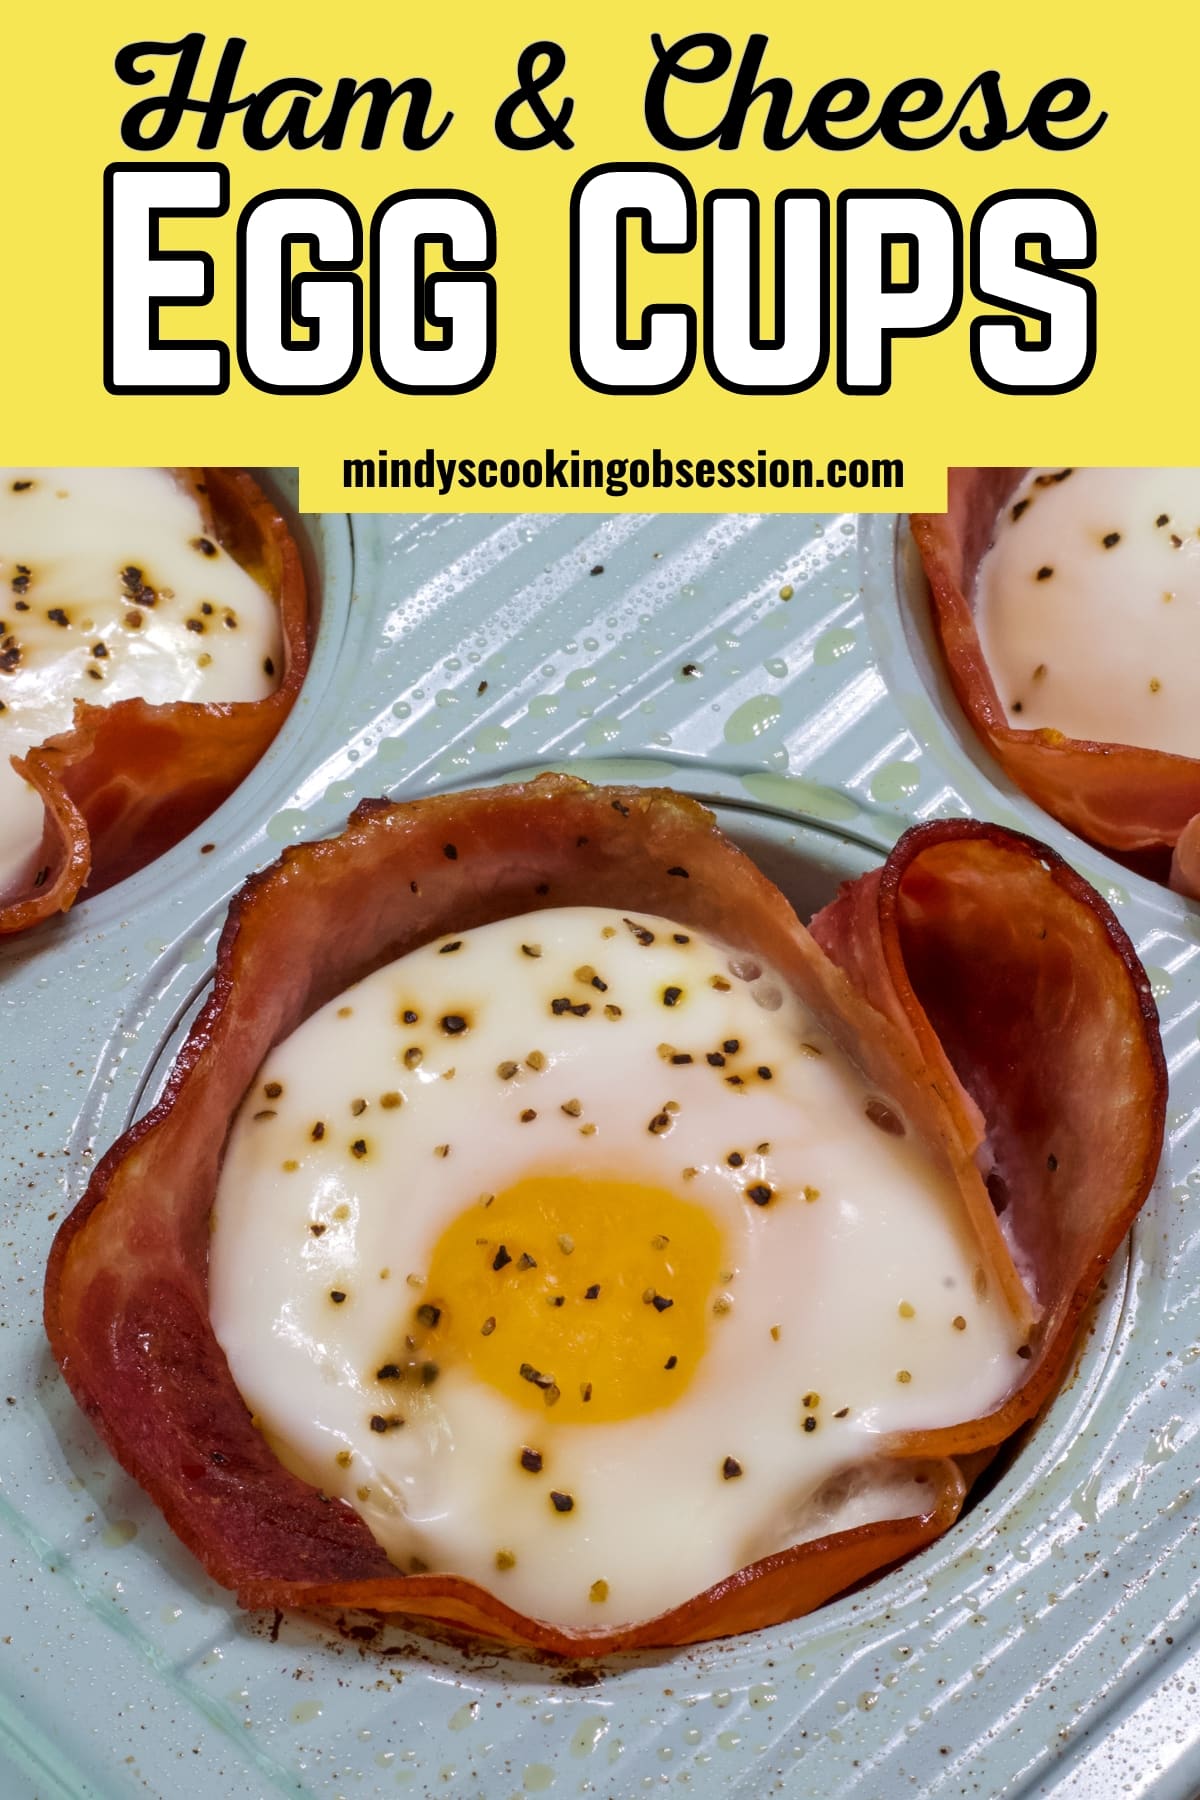 Our delicious ham and cheese egg cups are the perfect savory breakfast option for busy mornings, ready in under 20 minutes! Packed with protein and healthy fats, these low carb delights are a fantastic way to start your day. They're also perfect for feeding a crowd or to make ahead for meal prep. We like to serve these eggs cups with a little bit of fresh fruit and toast, a biscuit, or English muffin for a healthy breakfast the whole family loves. via @mindyscookingobsession